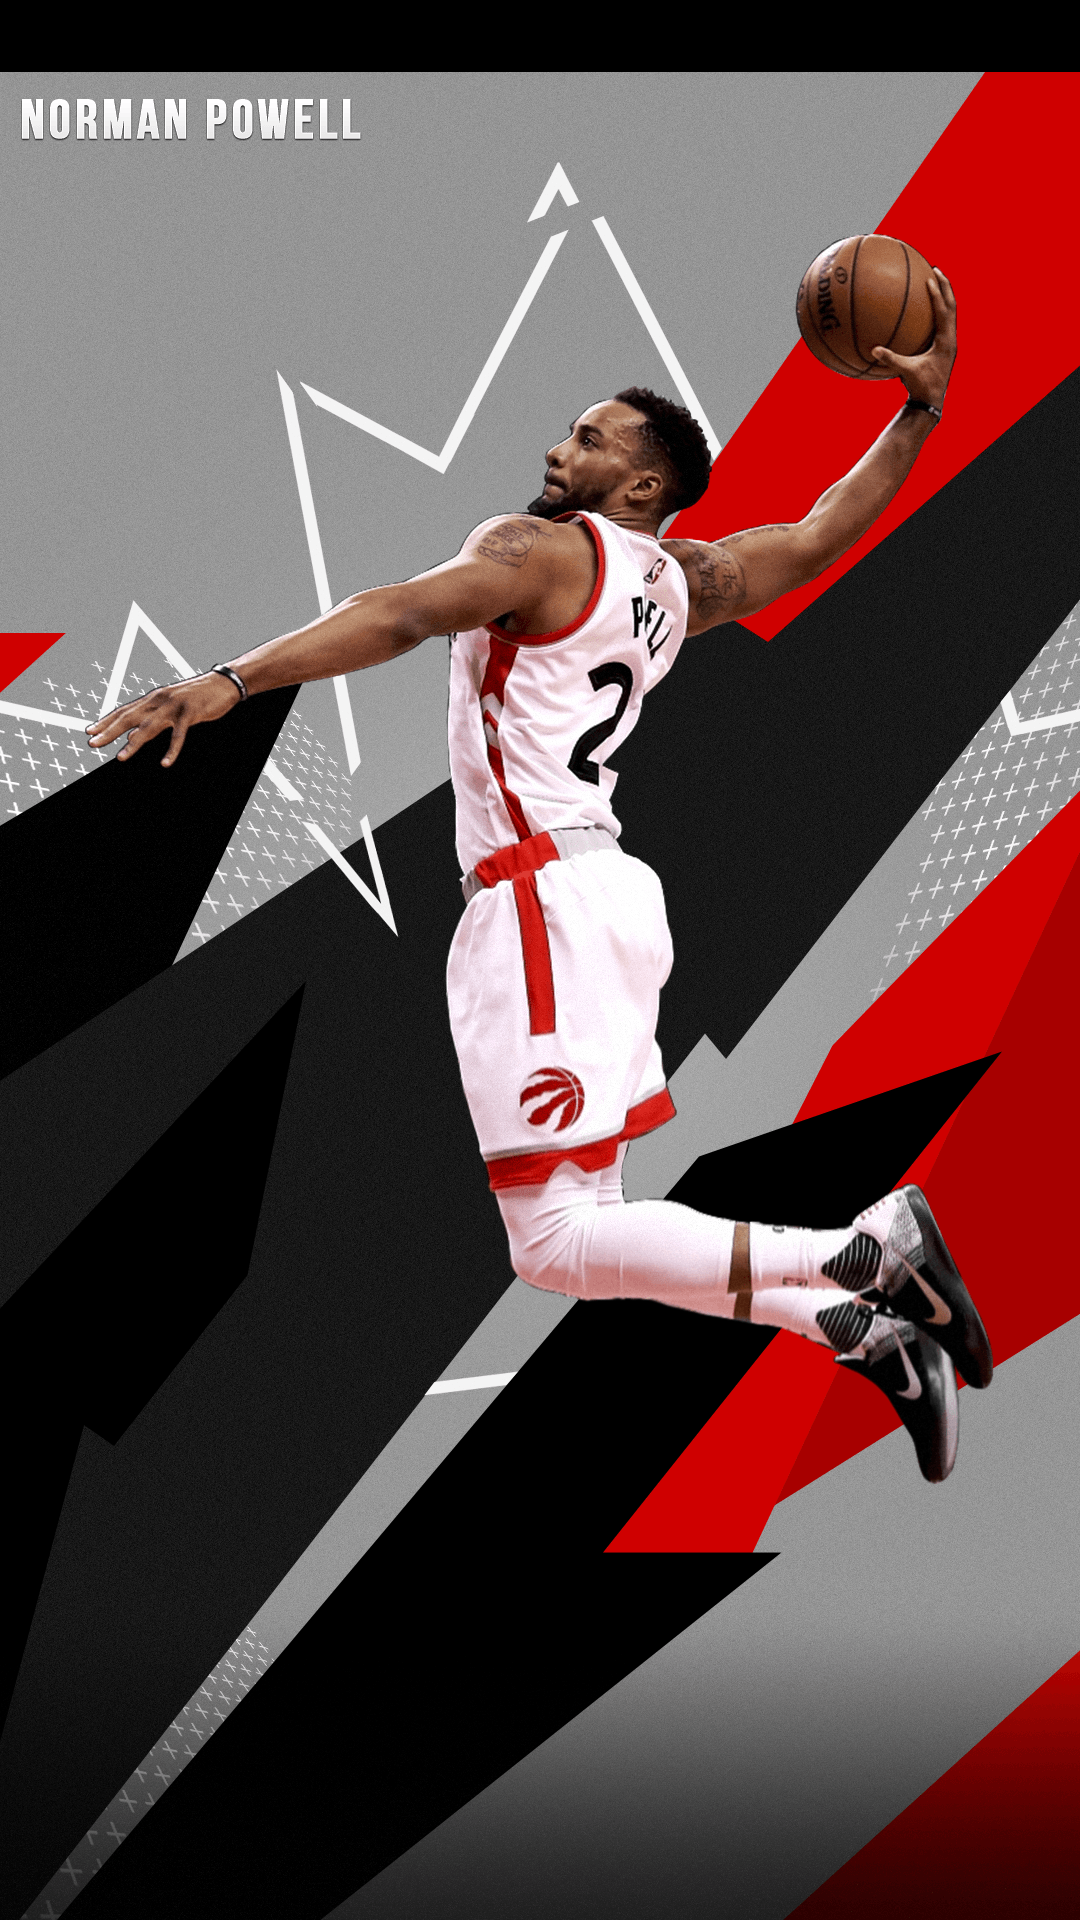 Norman Powell 2k18 Style Mobile Wallpaper I Made - Slam Dunk , HD Wallpaper & Backgrounds